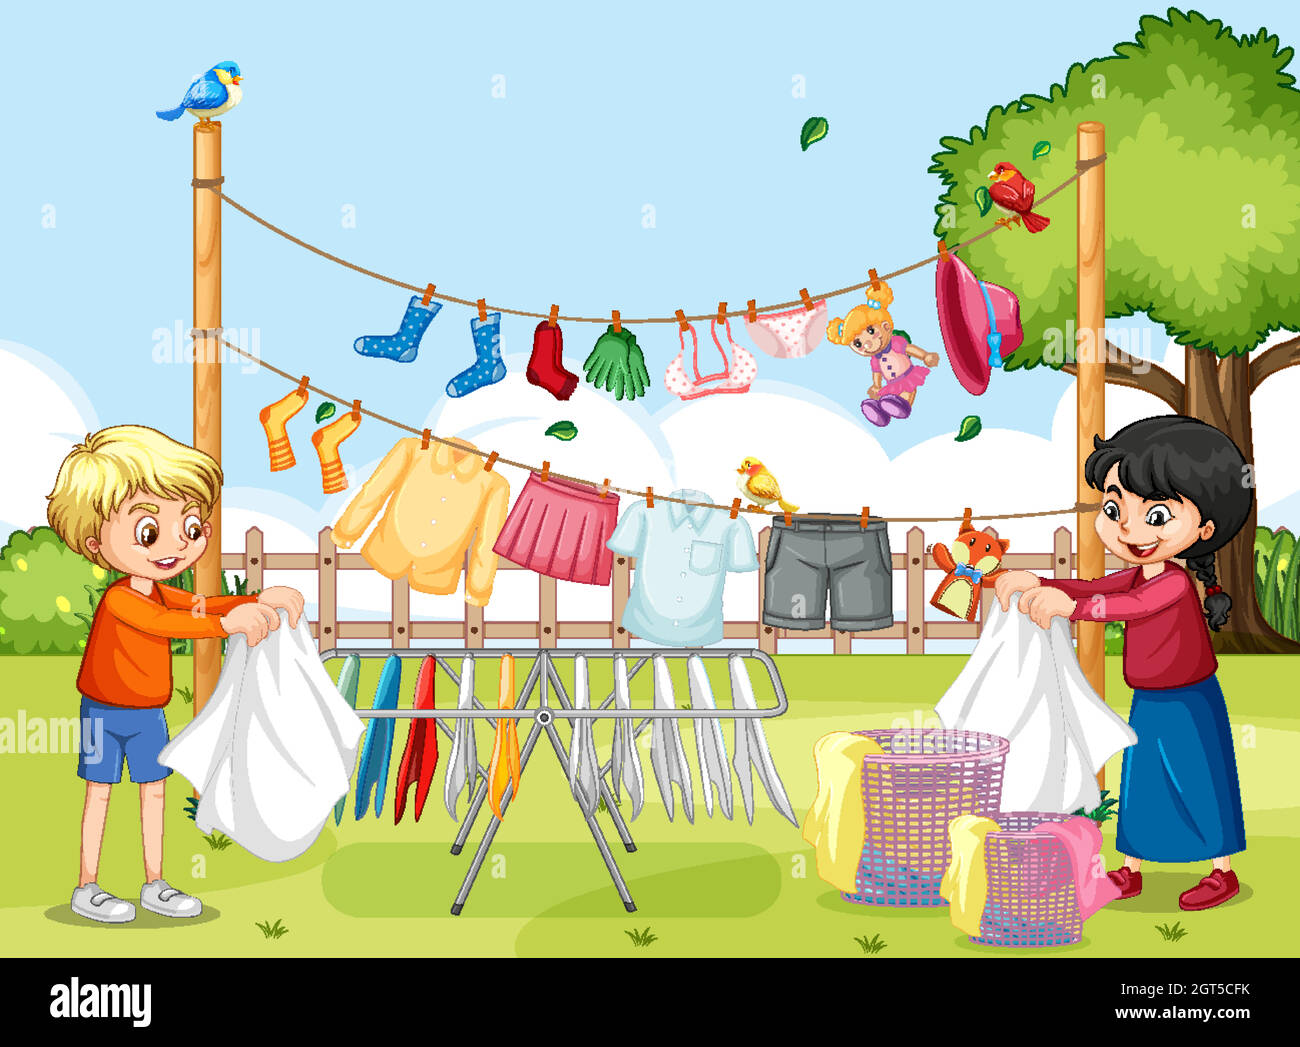 Outdoor scene with children hanging clothes on clotheslines Stock Vector